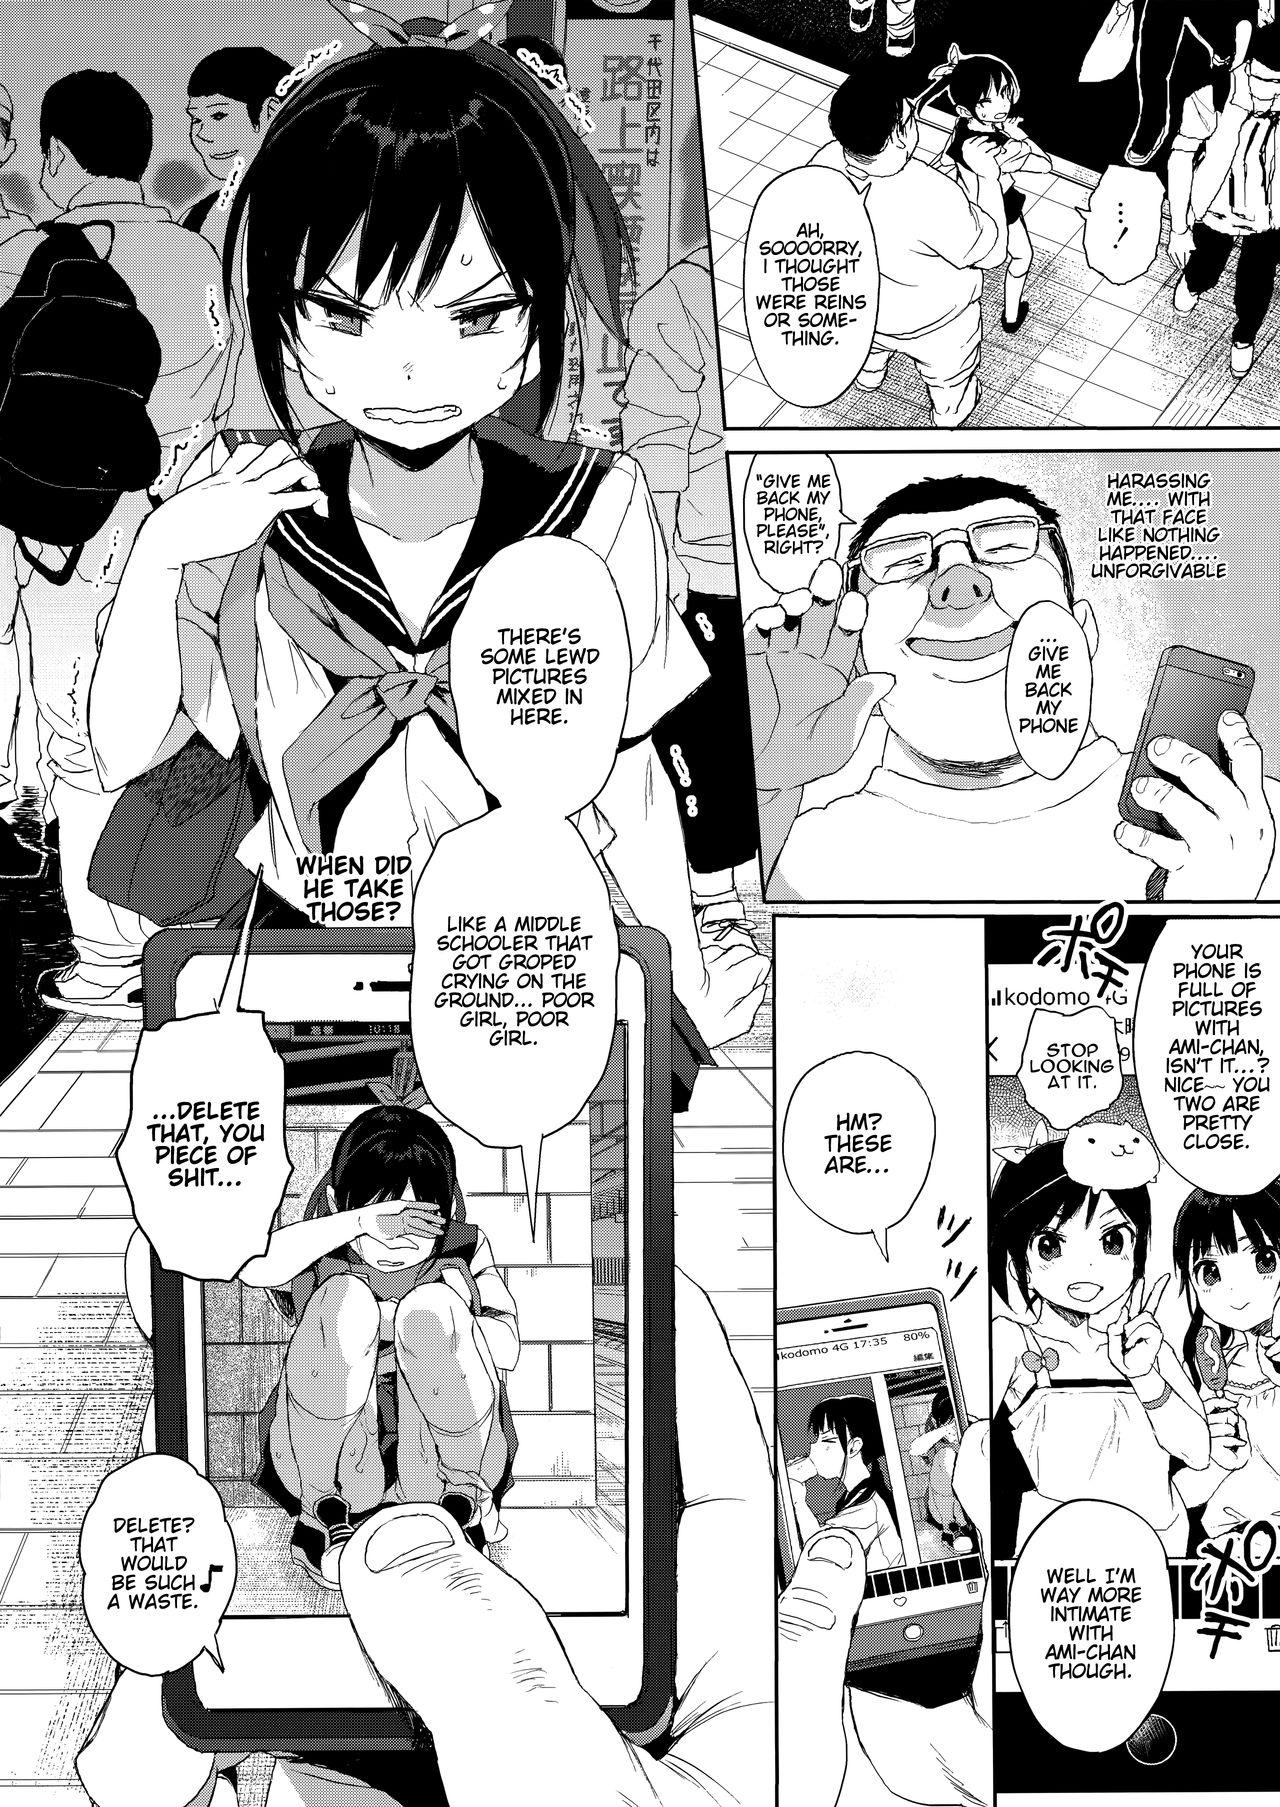 Highheels JC Chikan de Seikyouiku 2 + JC no Omake | Molesting a Middle Schooler for Sex Education 2 + Extra - Original Yanks Featured - Page 3